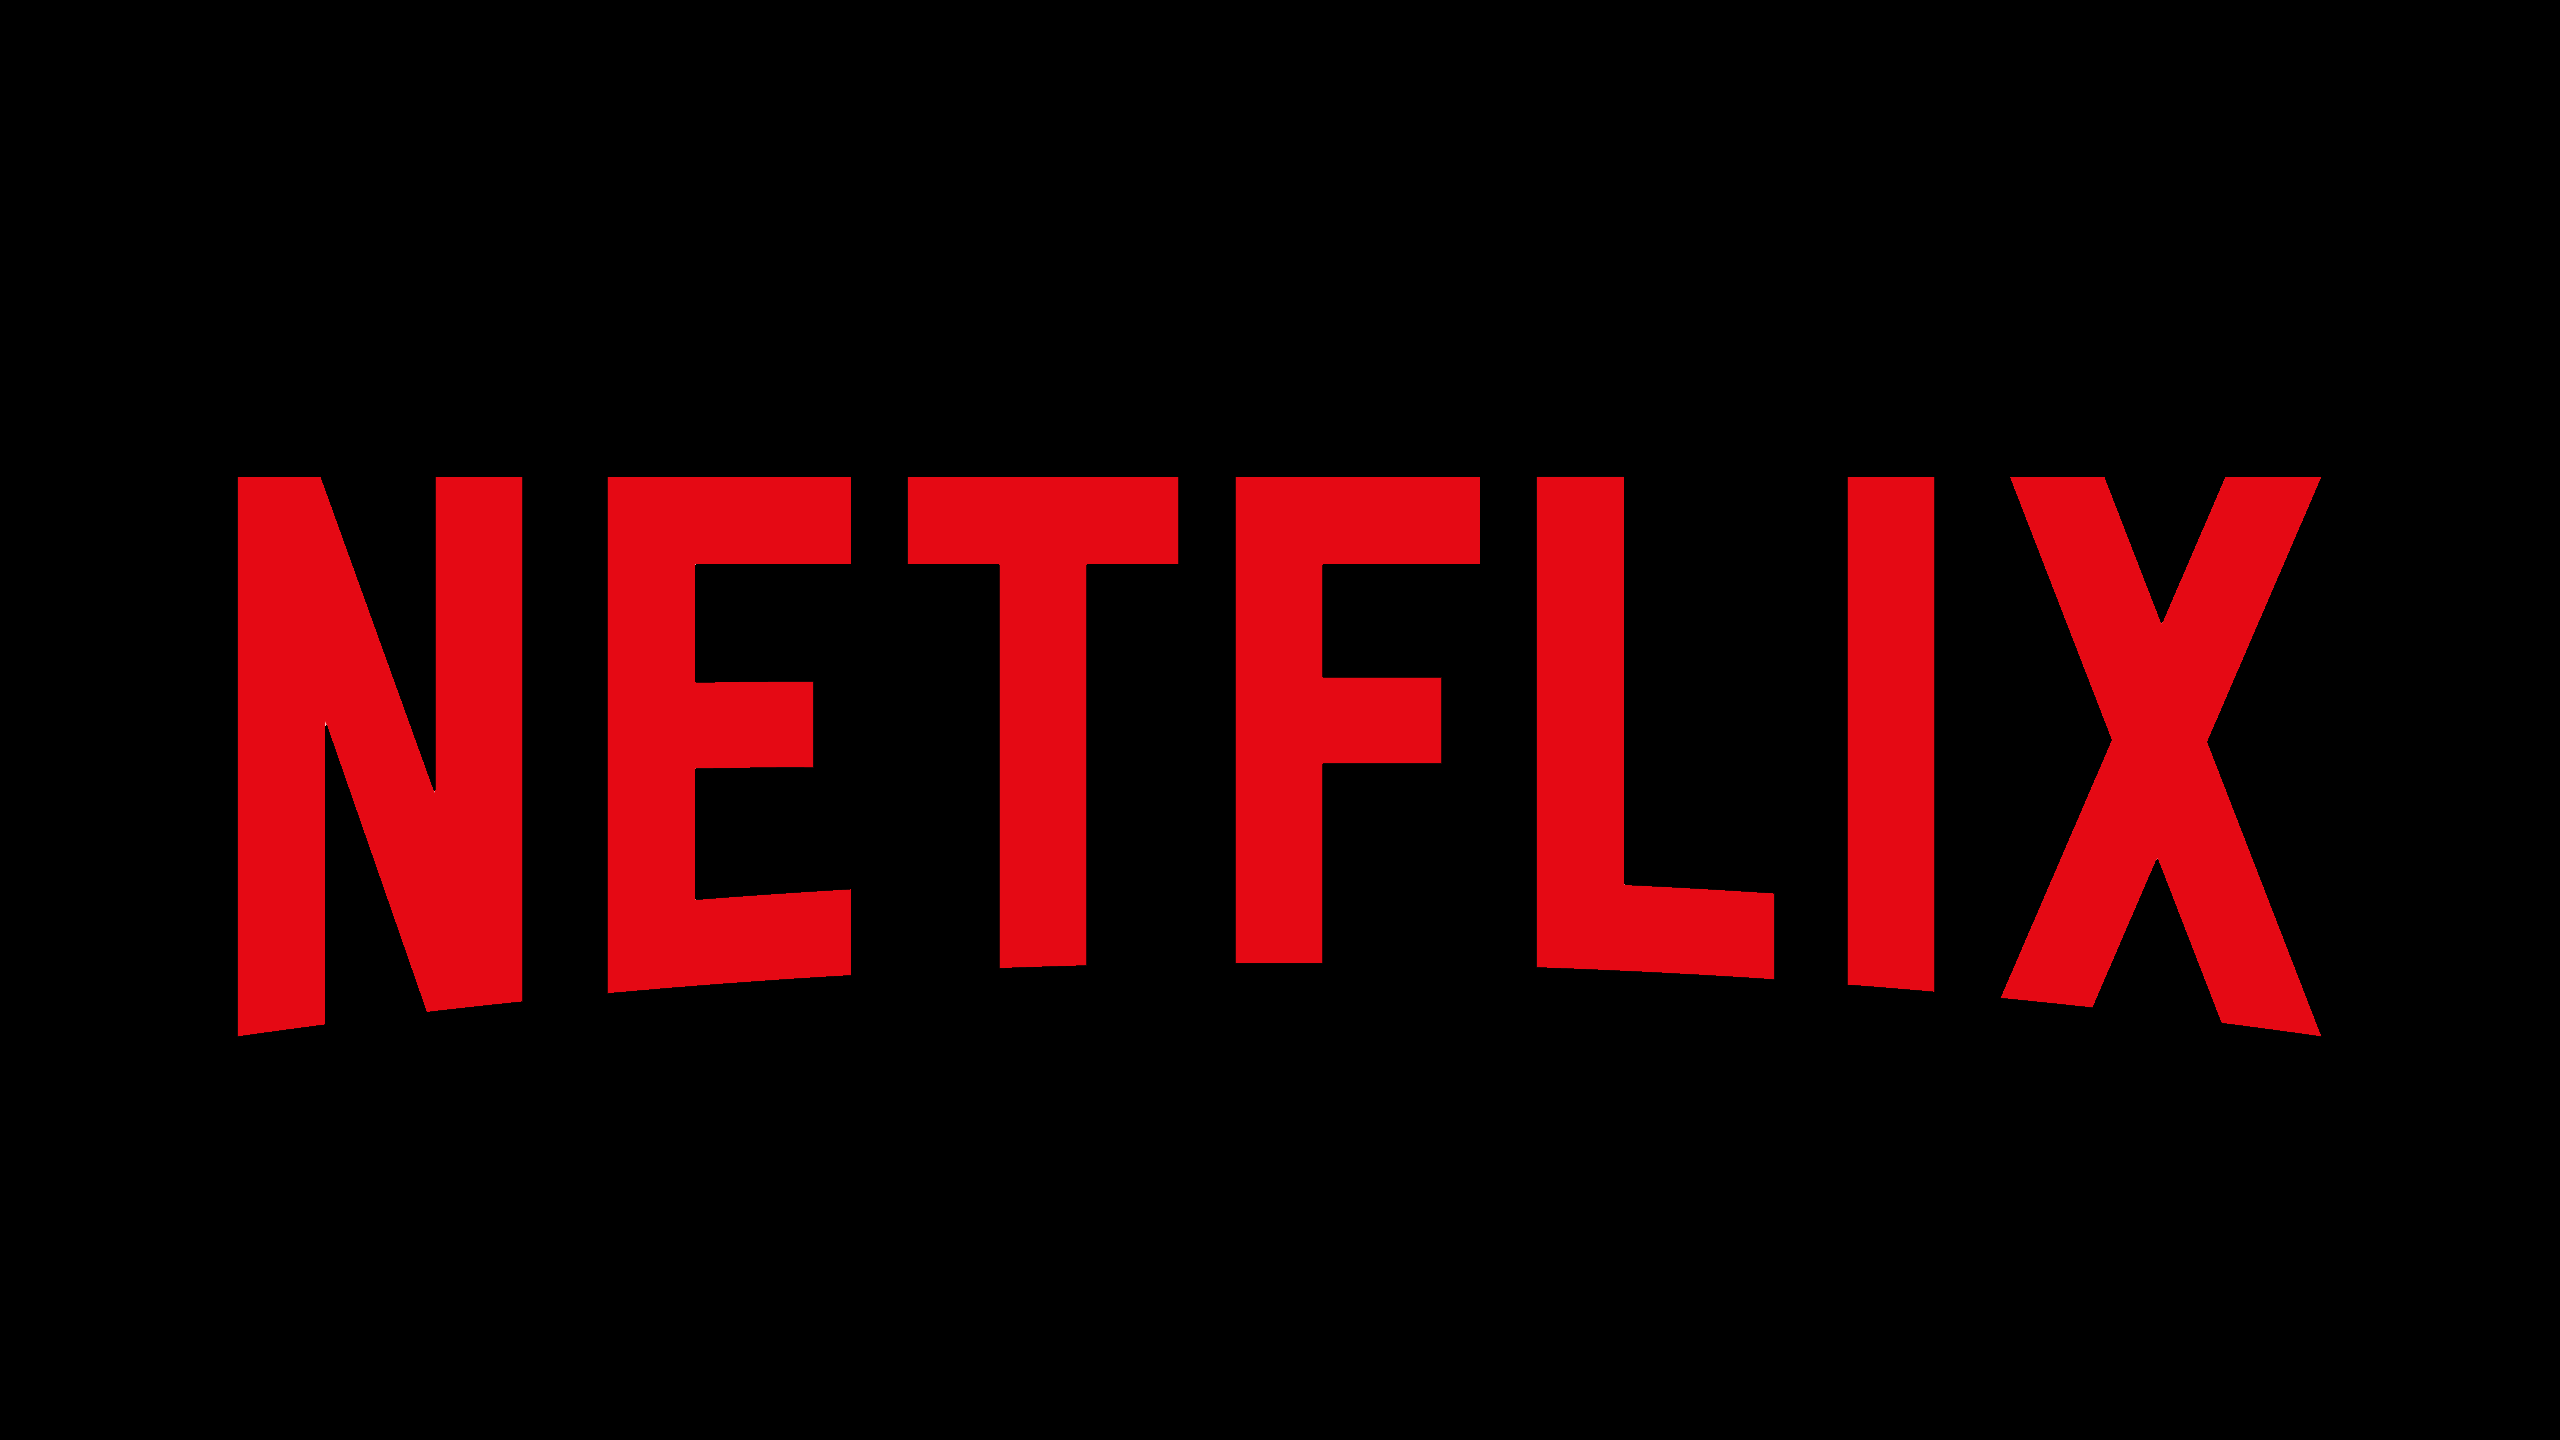 10+ Netflix HD Wallpapers and Backgrounds